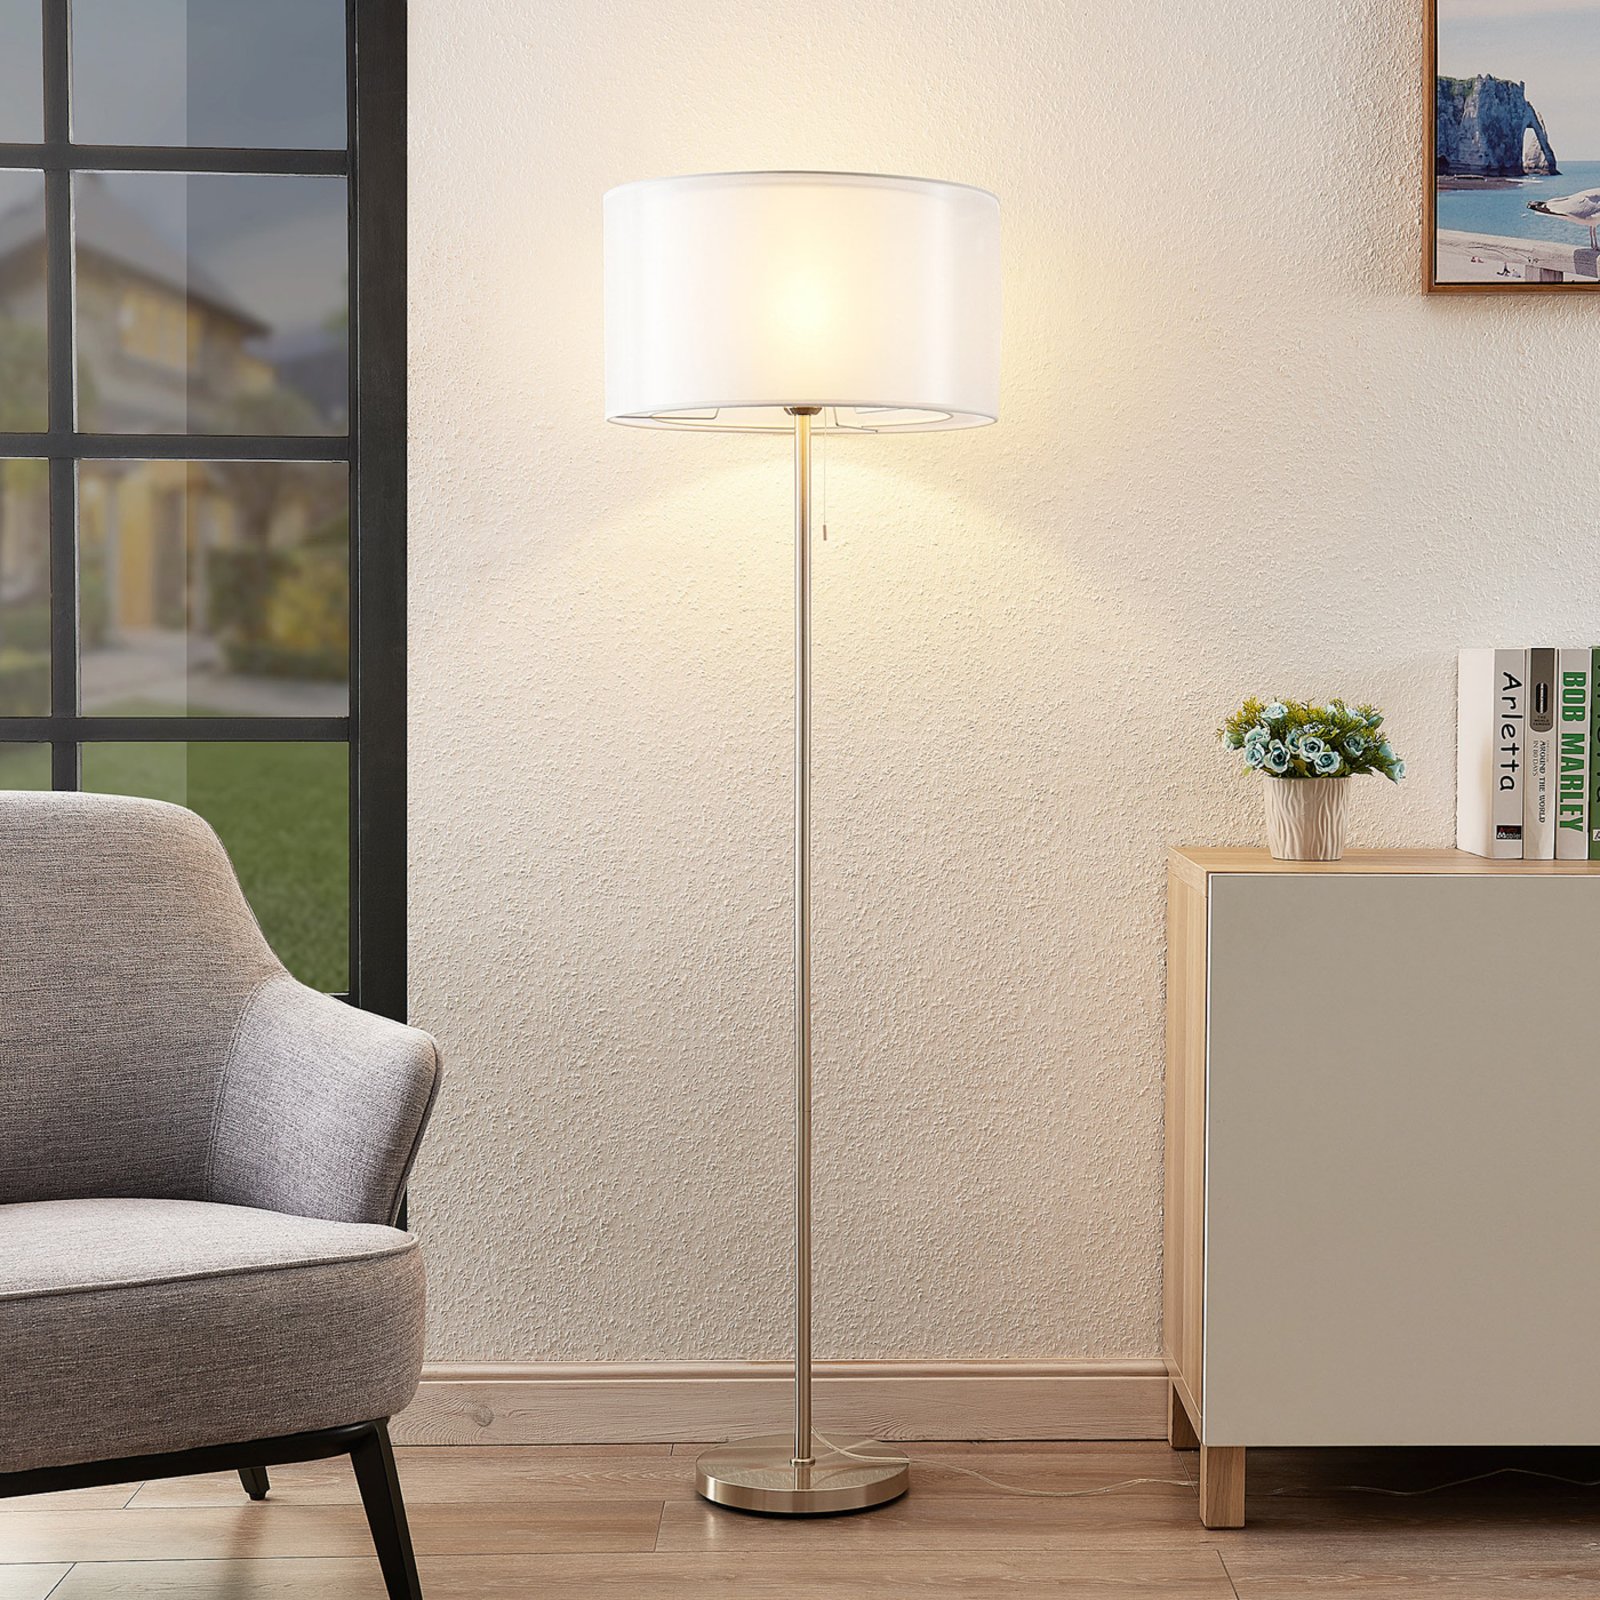 Lindby Taxima vloerlamp, wit